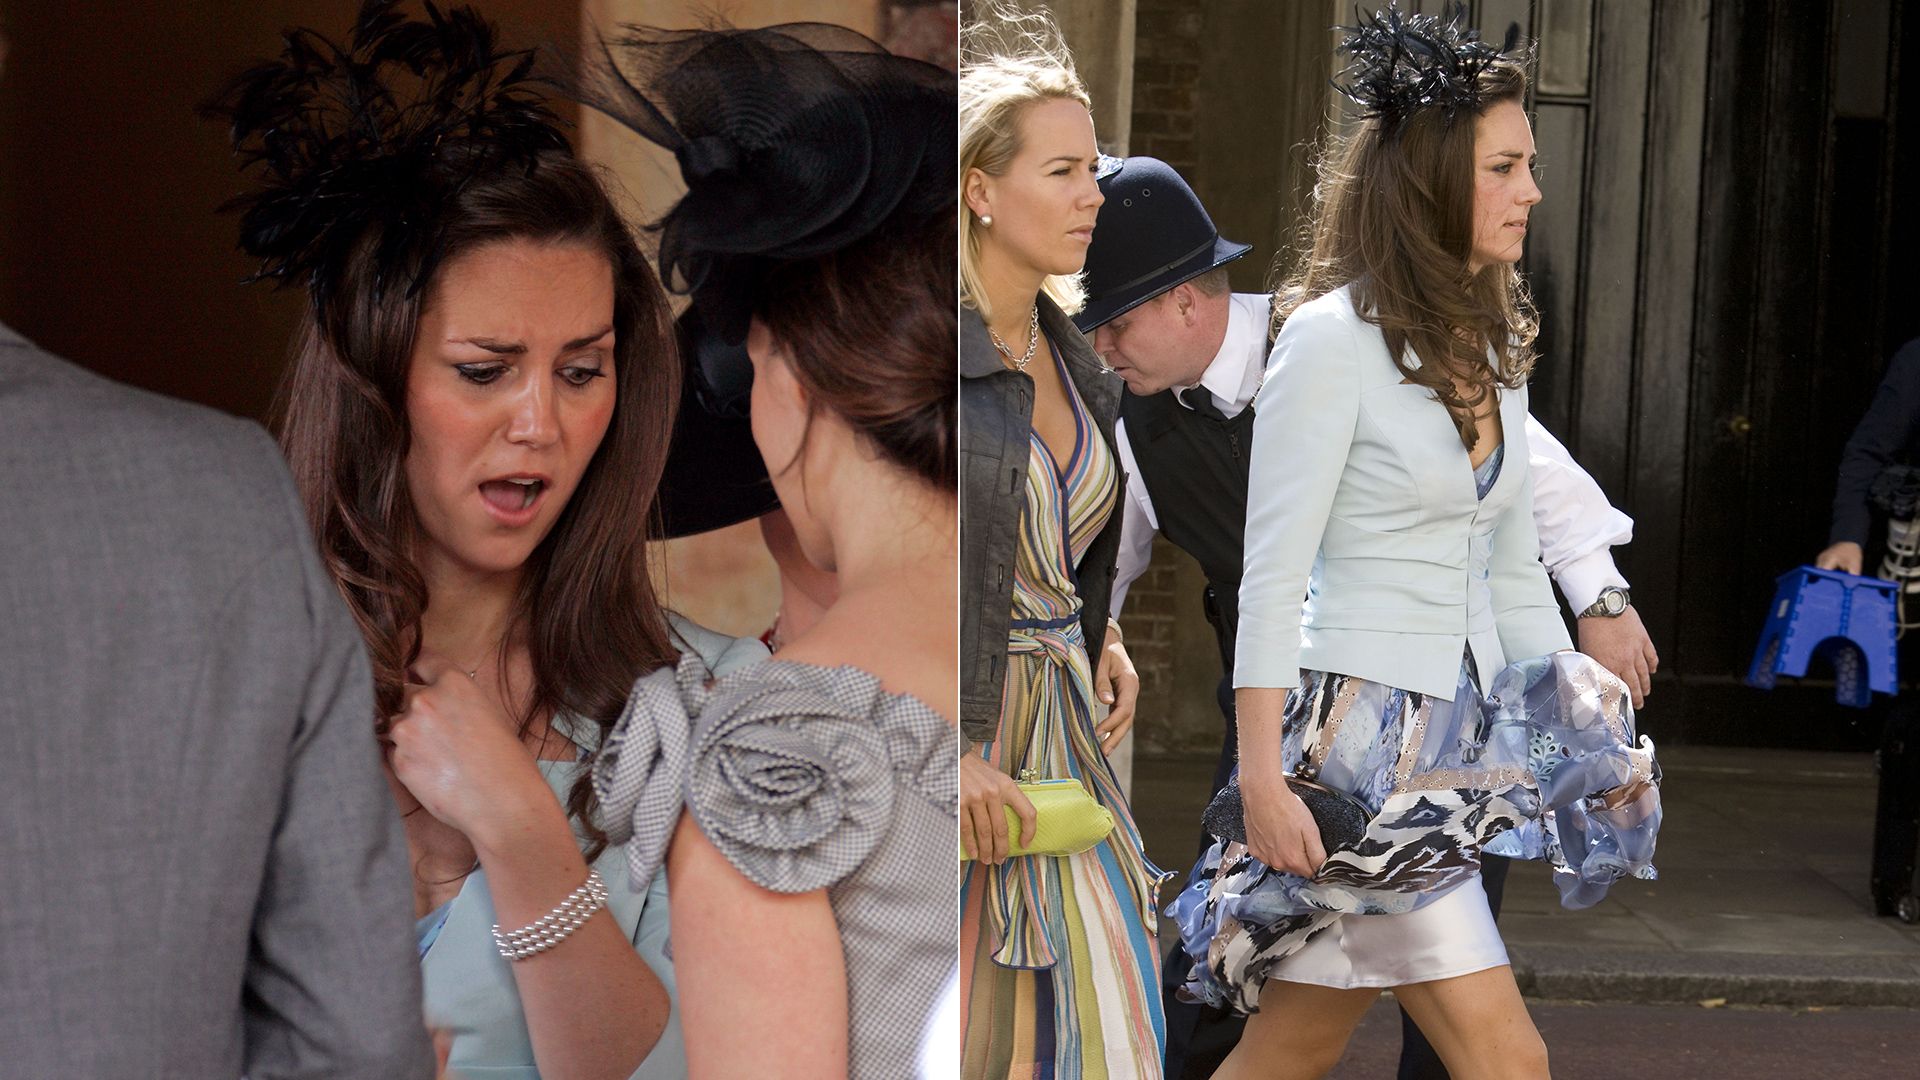 Princess Kate wore a mini skirt and nobody clocked it